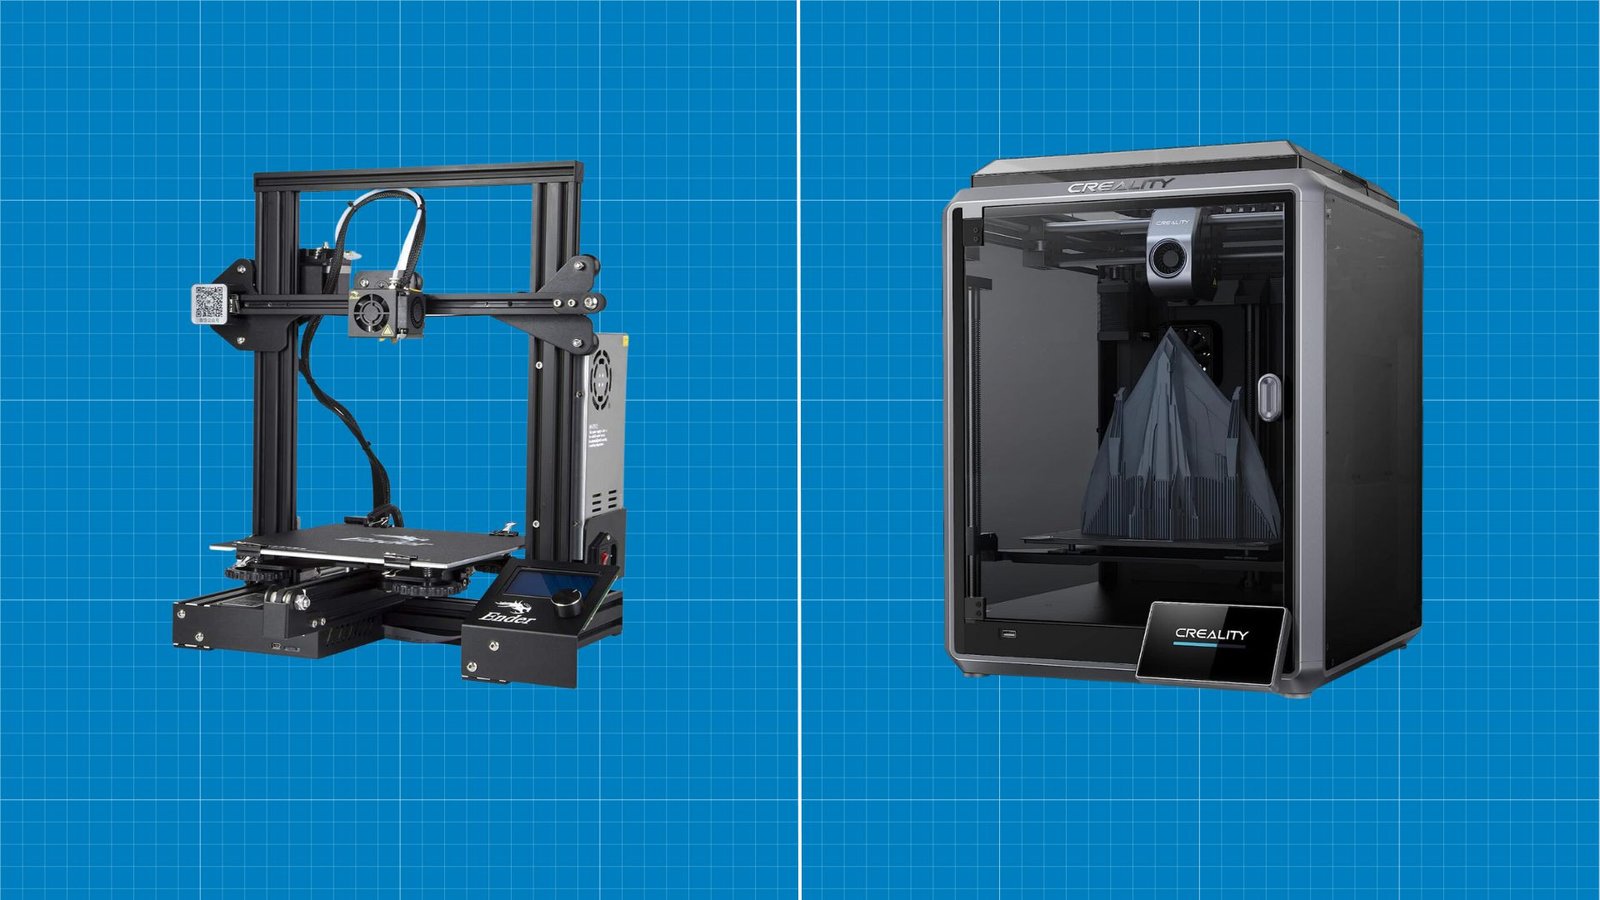 7 reasons why you should consider investing in a 3D printer